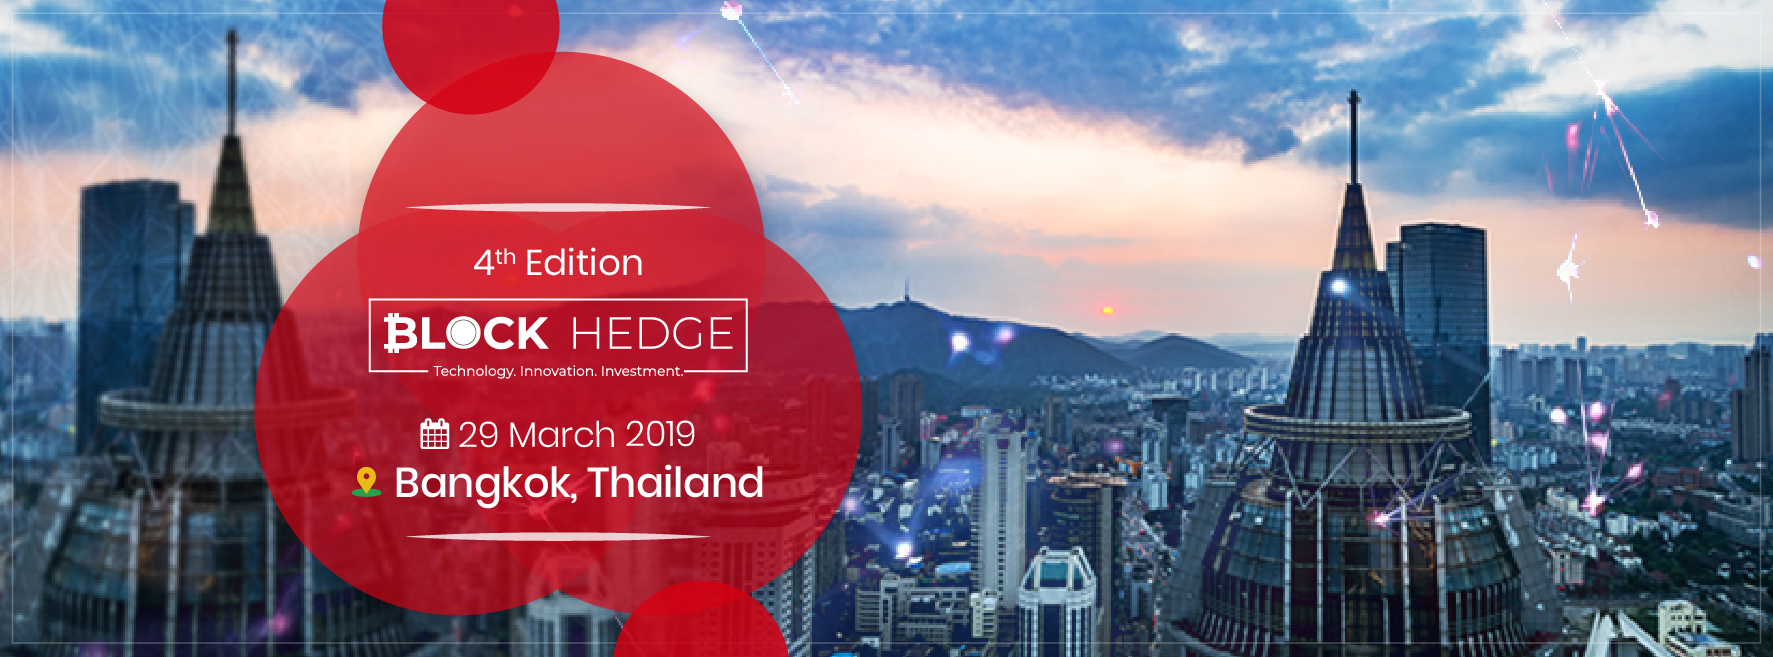 The 2nd Annual Conference of Block Hedge Business 2019 At Bangkok Is Set to Create Ripples in The Blockchain World organized by Block Hedge